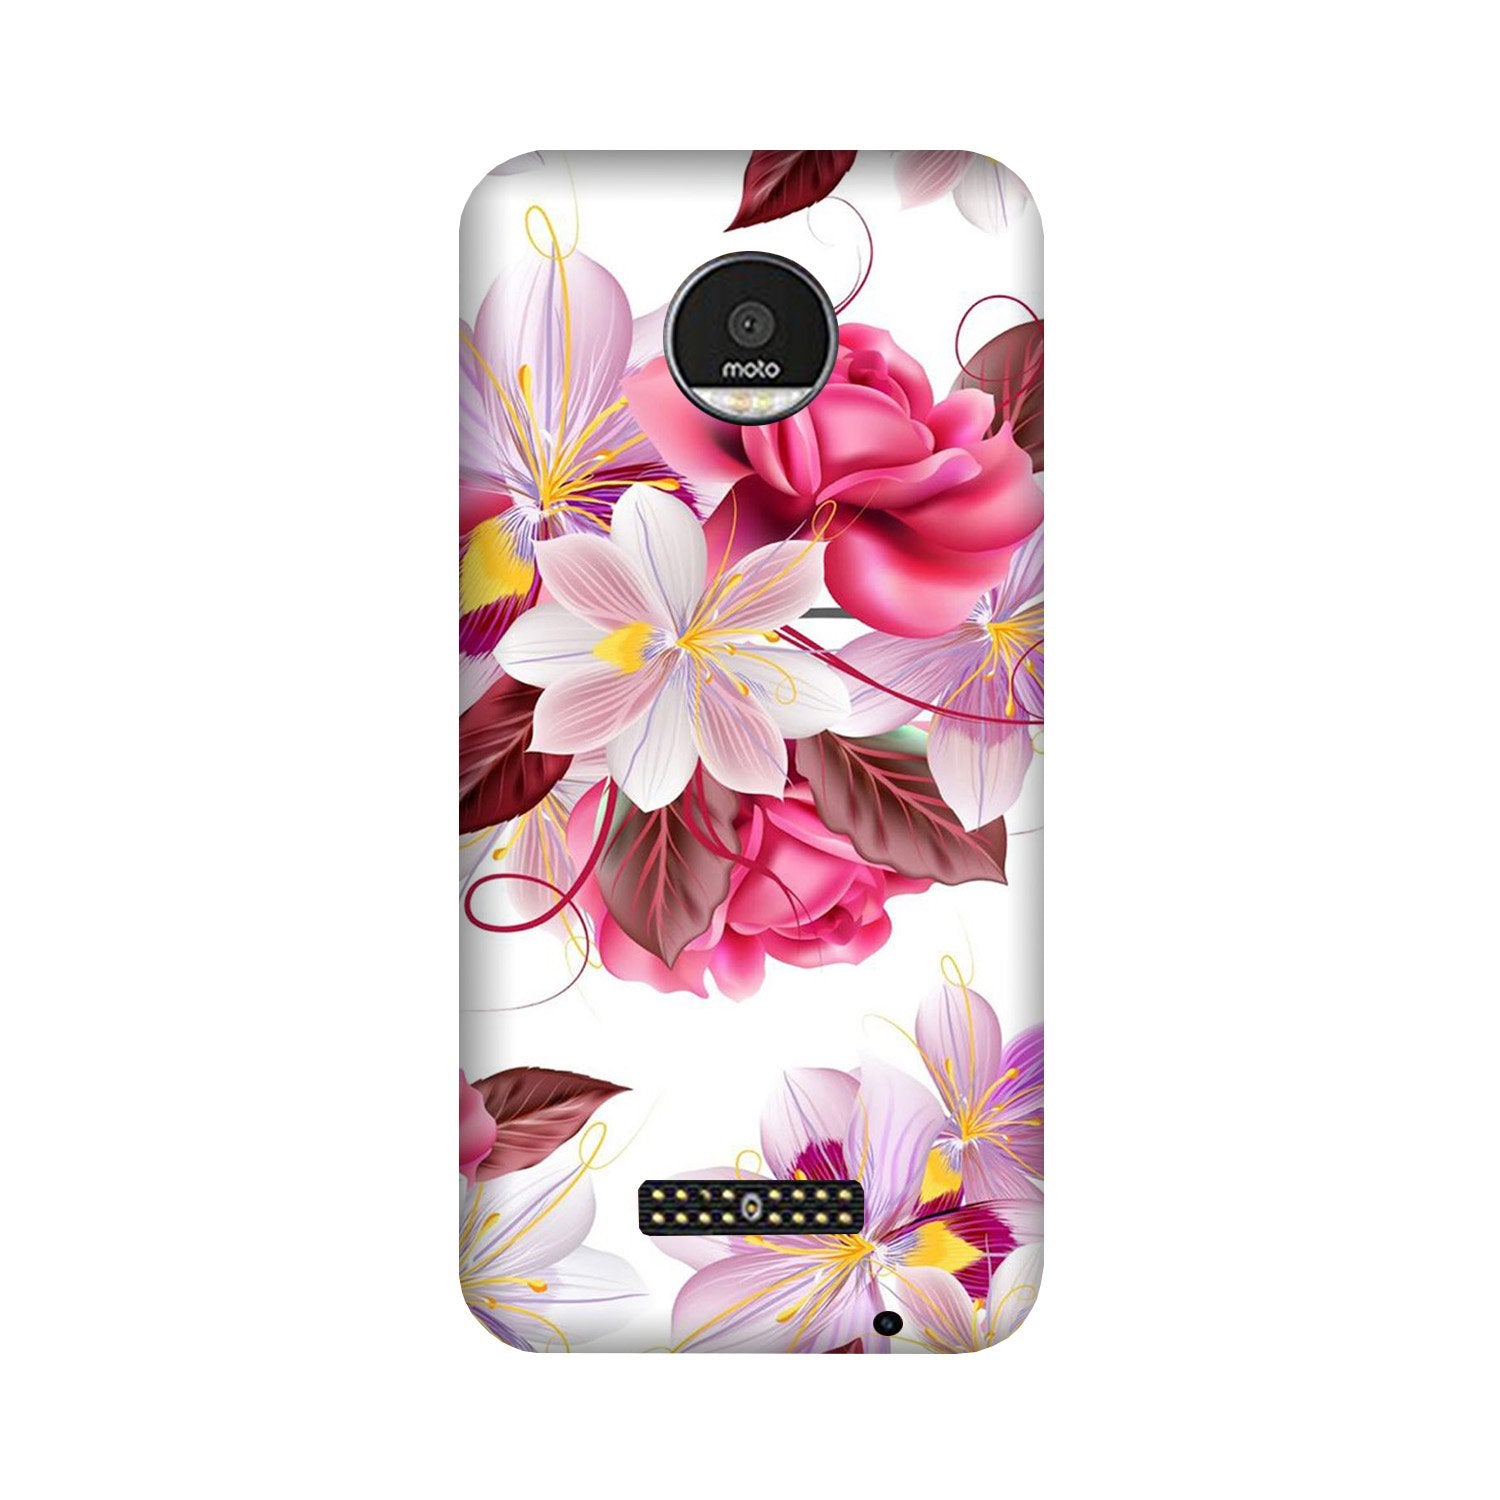 Beautiful flowers Case for Moto Z2 Play